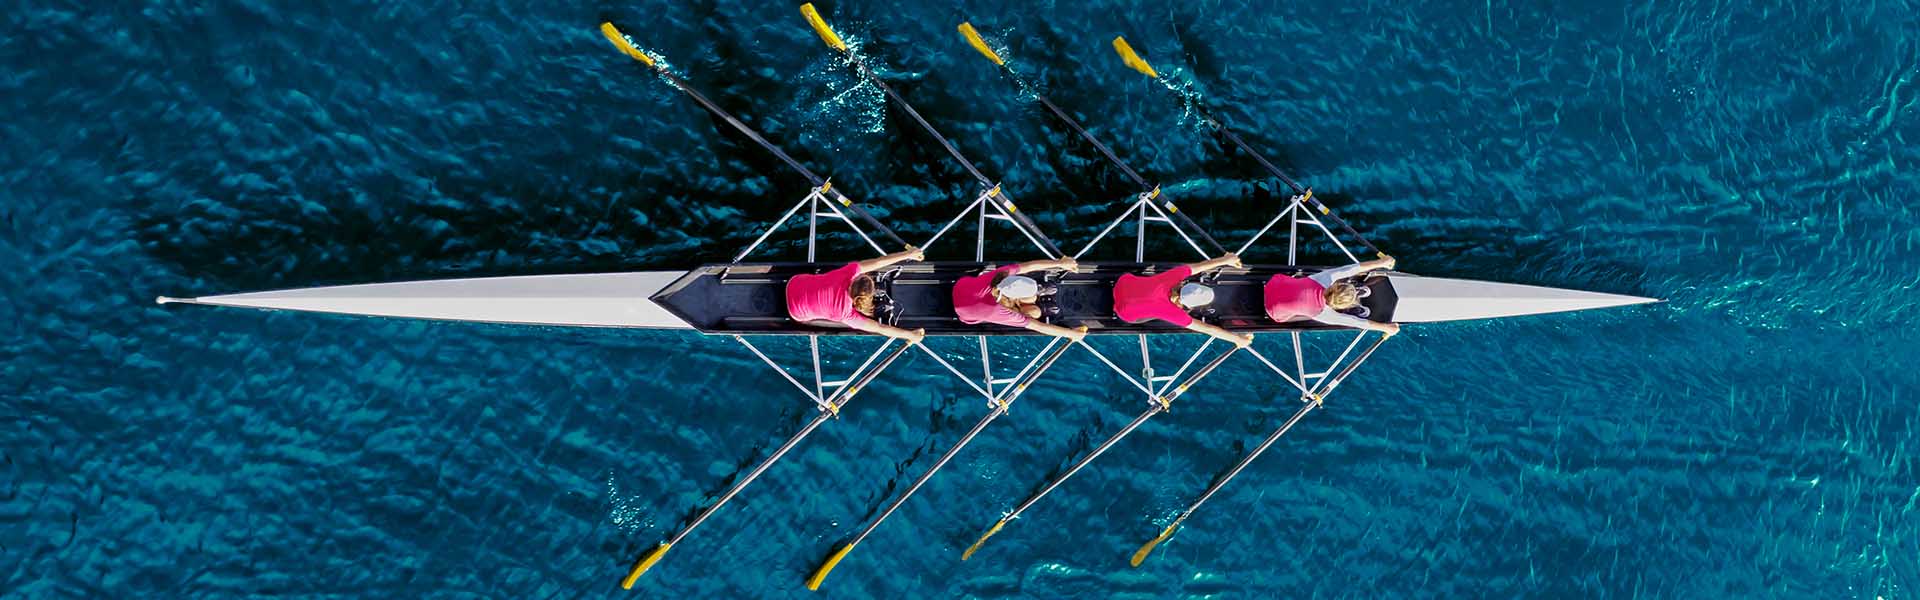 Rowers moving easily through water financial due diligence